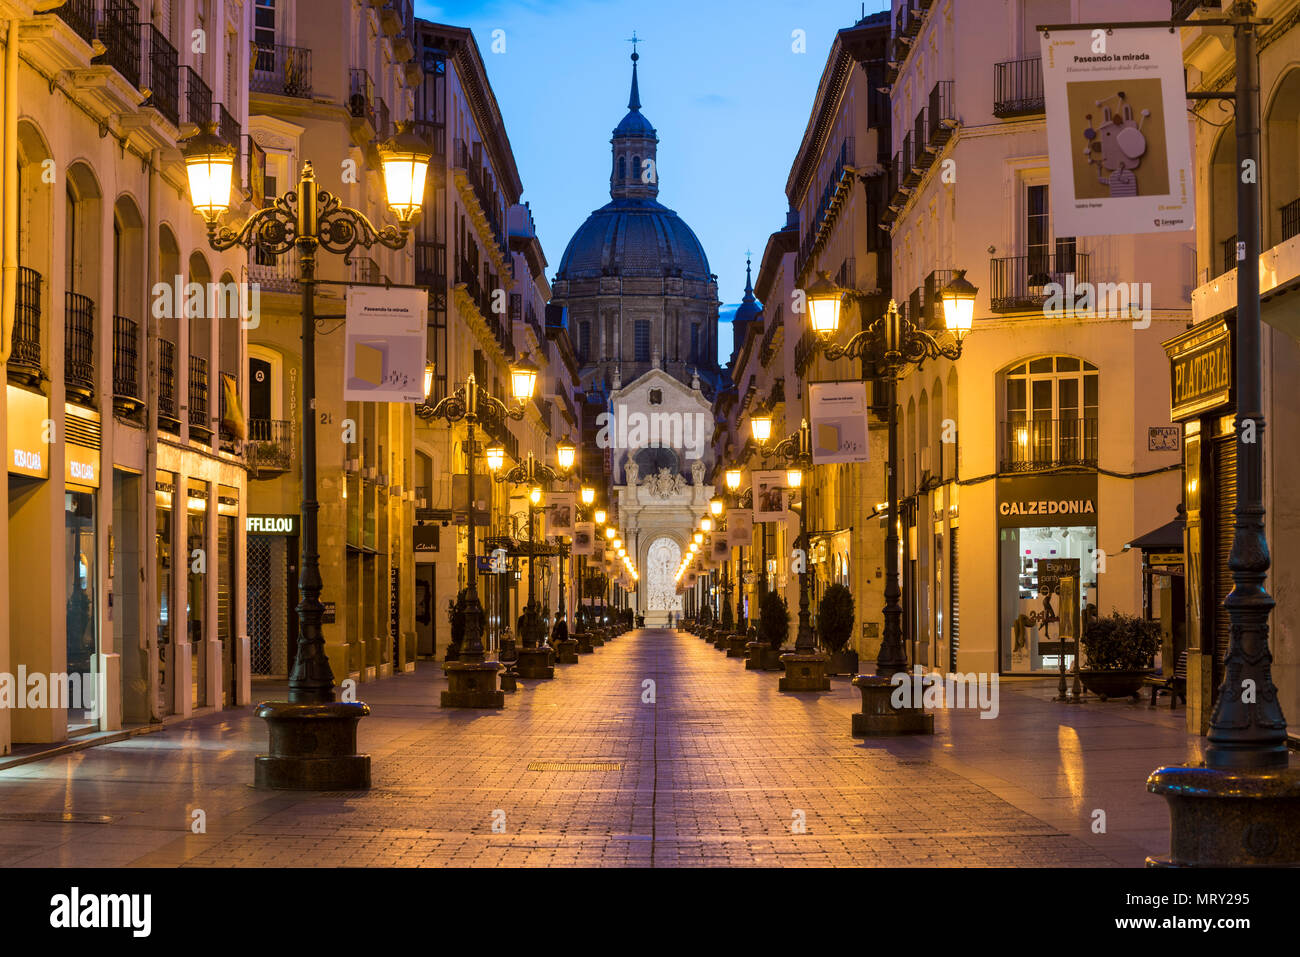 Calle Alfonso and the Cathedral of Our Lady of the Pillar at dusk. Zaragoza, Aragon, Spain, Europe Stock Photo